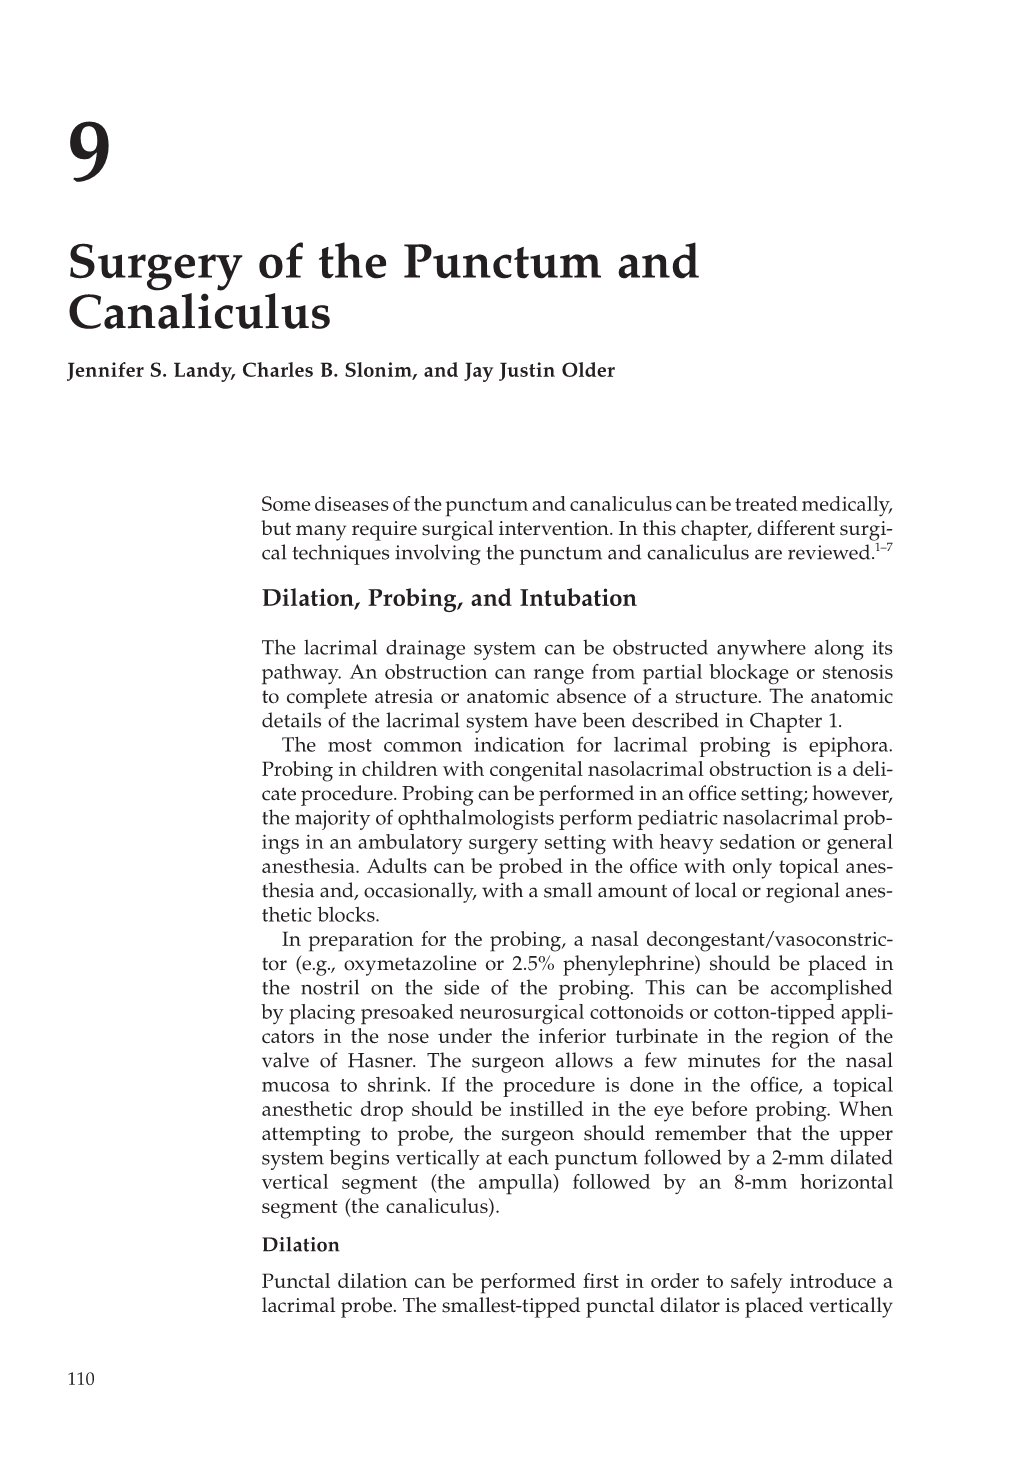 Surgery of the Punctum and Canaliculus